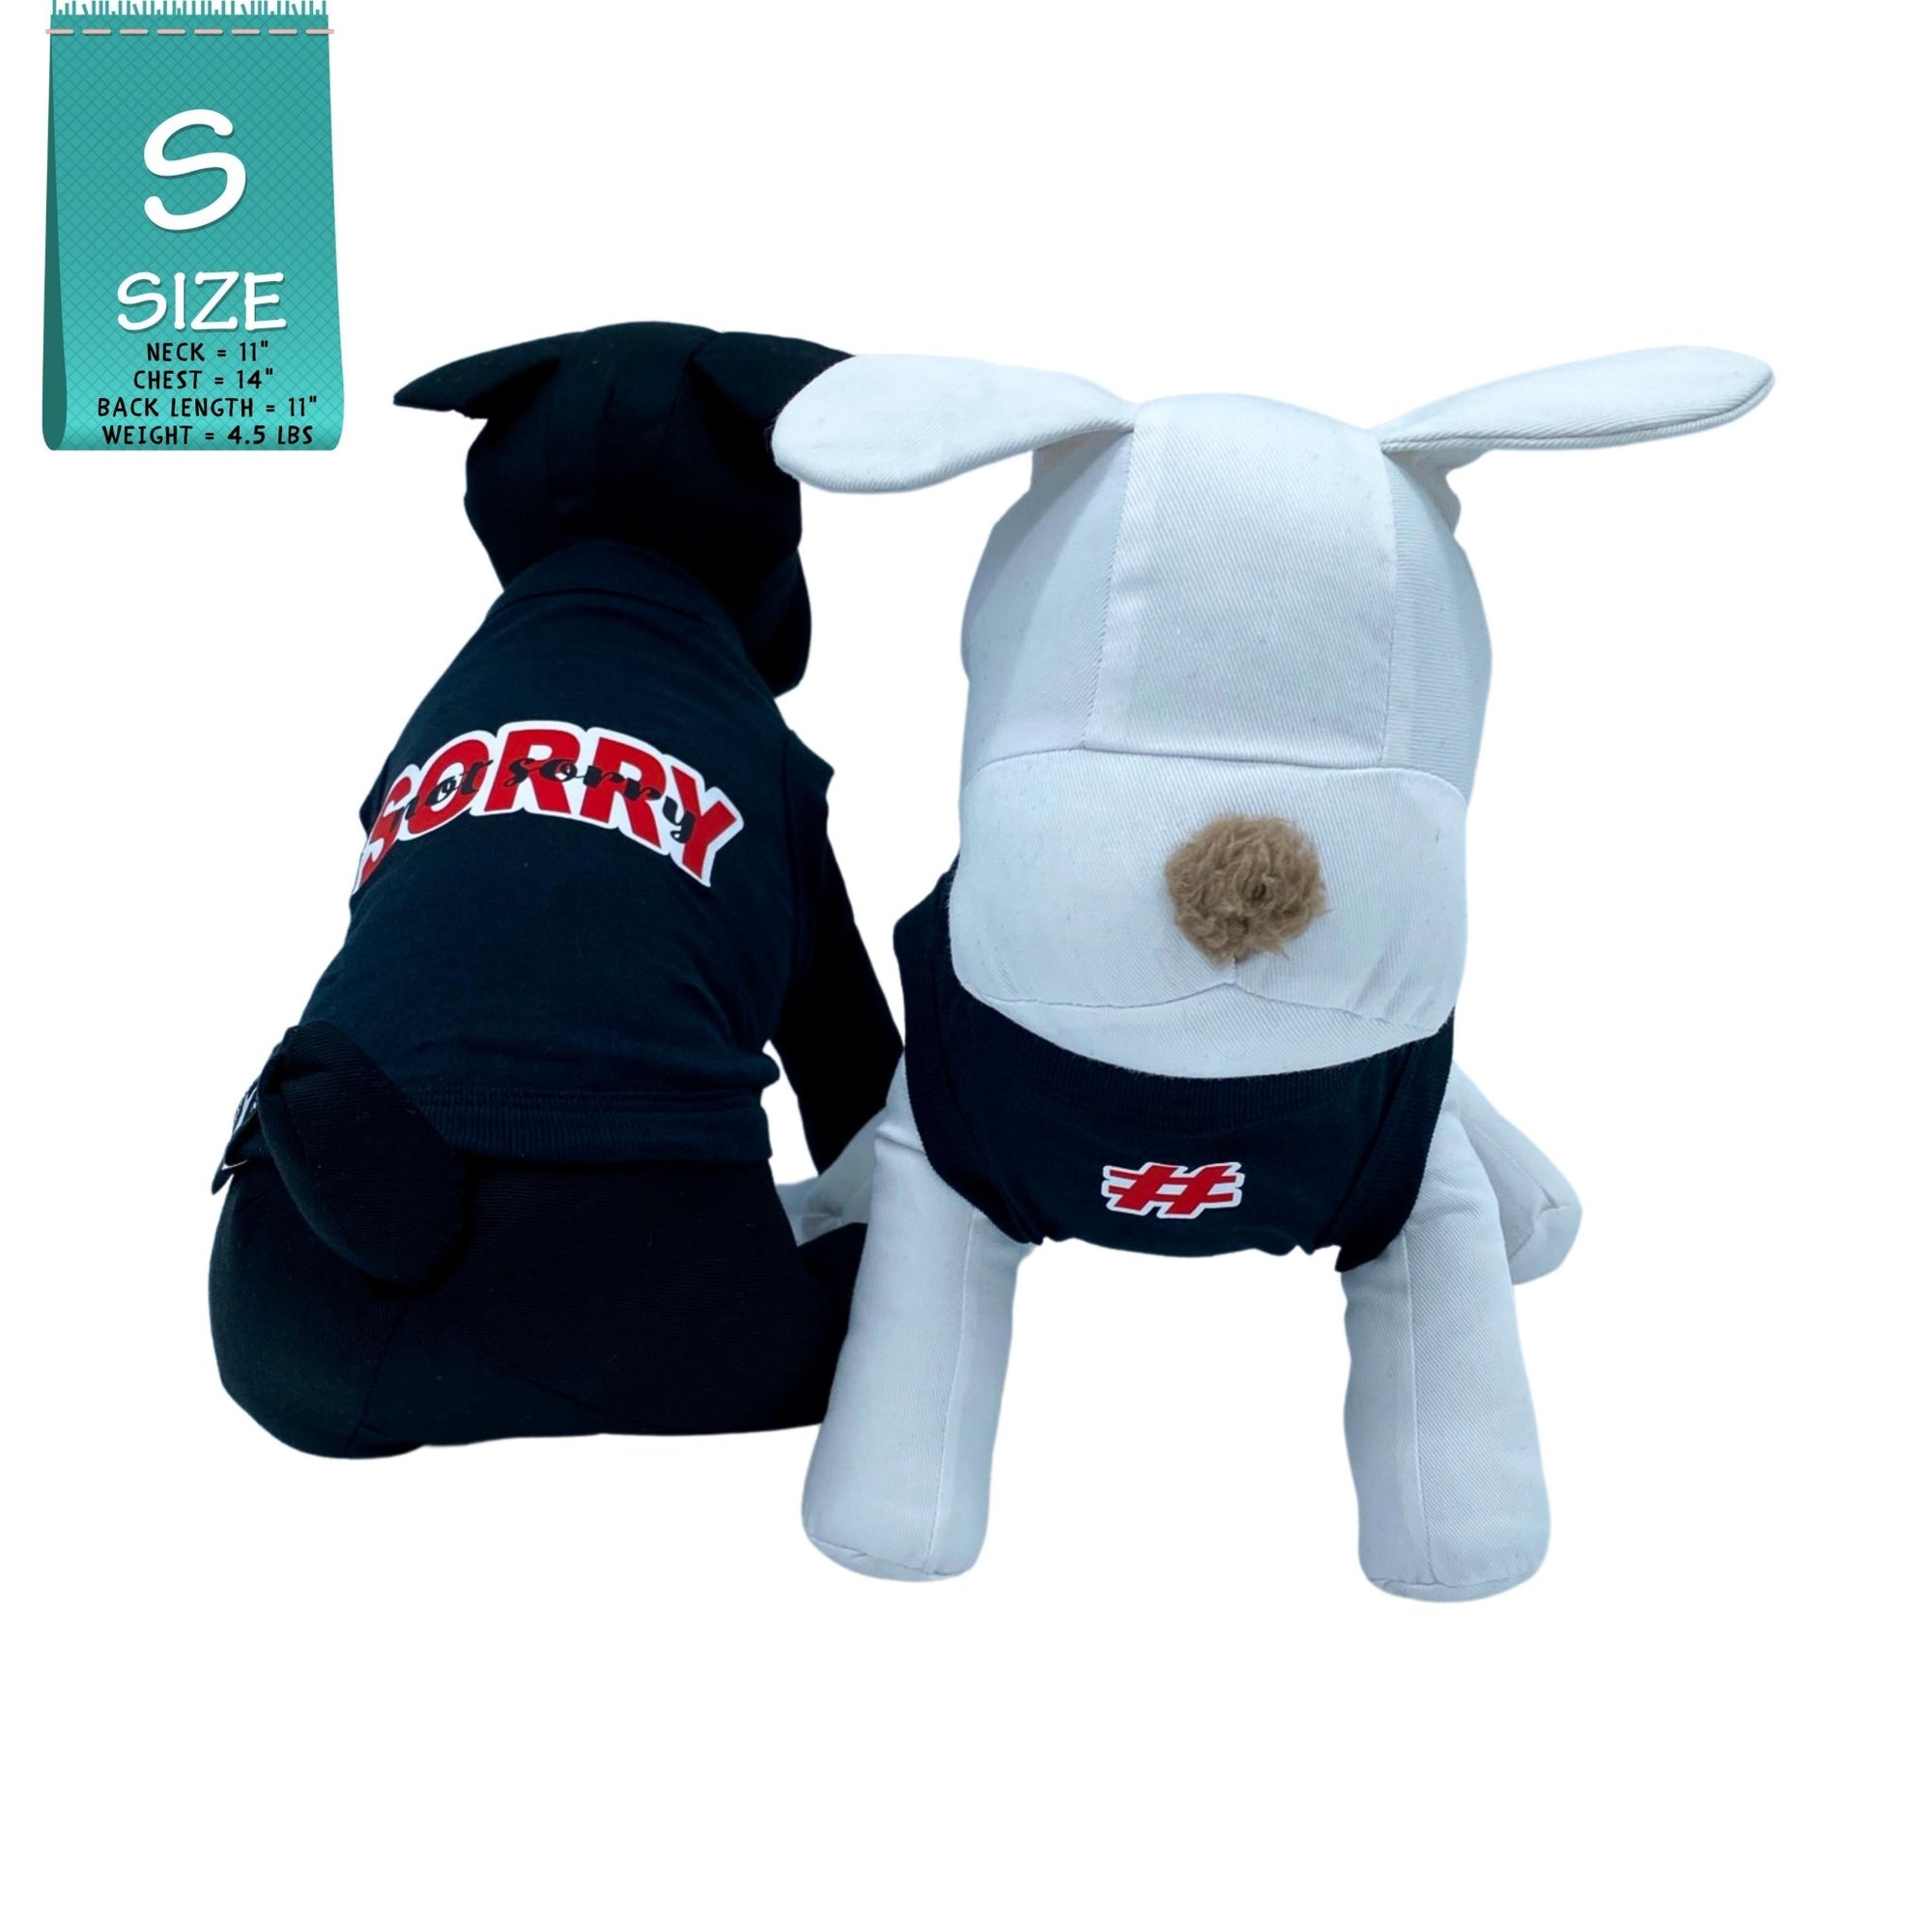 Dog T-Shirt - stuffed dogs one black and one white wearing &quot;Sorry Not Sorry&quot; black dog t-shirt with red and white lettering on back and red and white hashtag emoji on chest - against solid white background - Wag Trendz